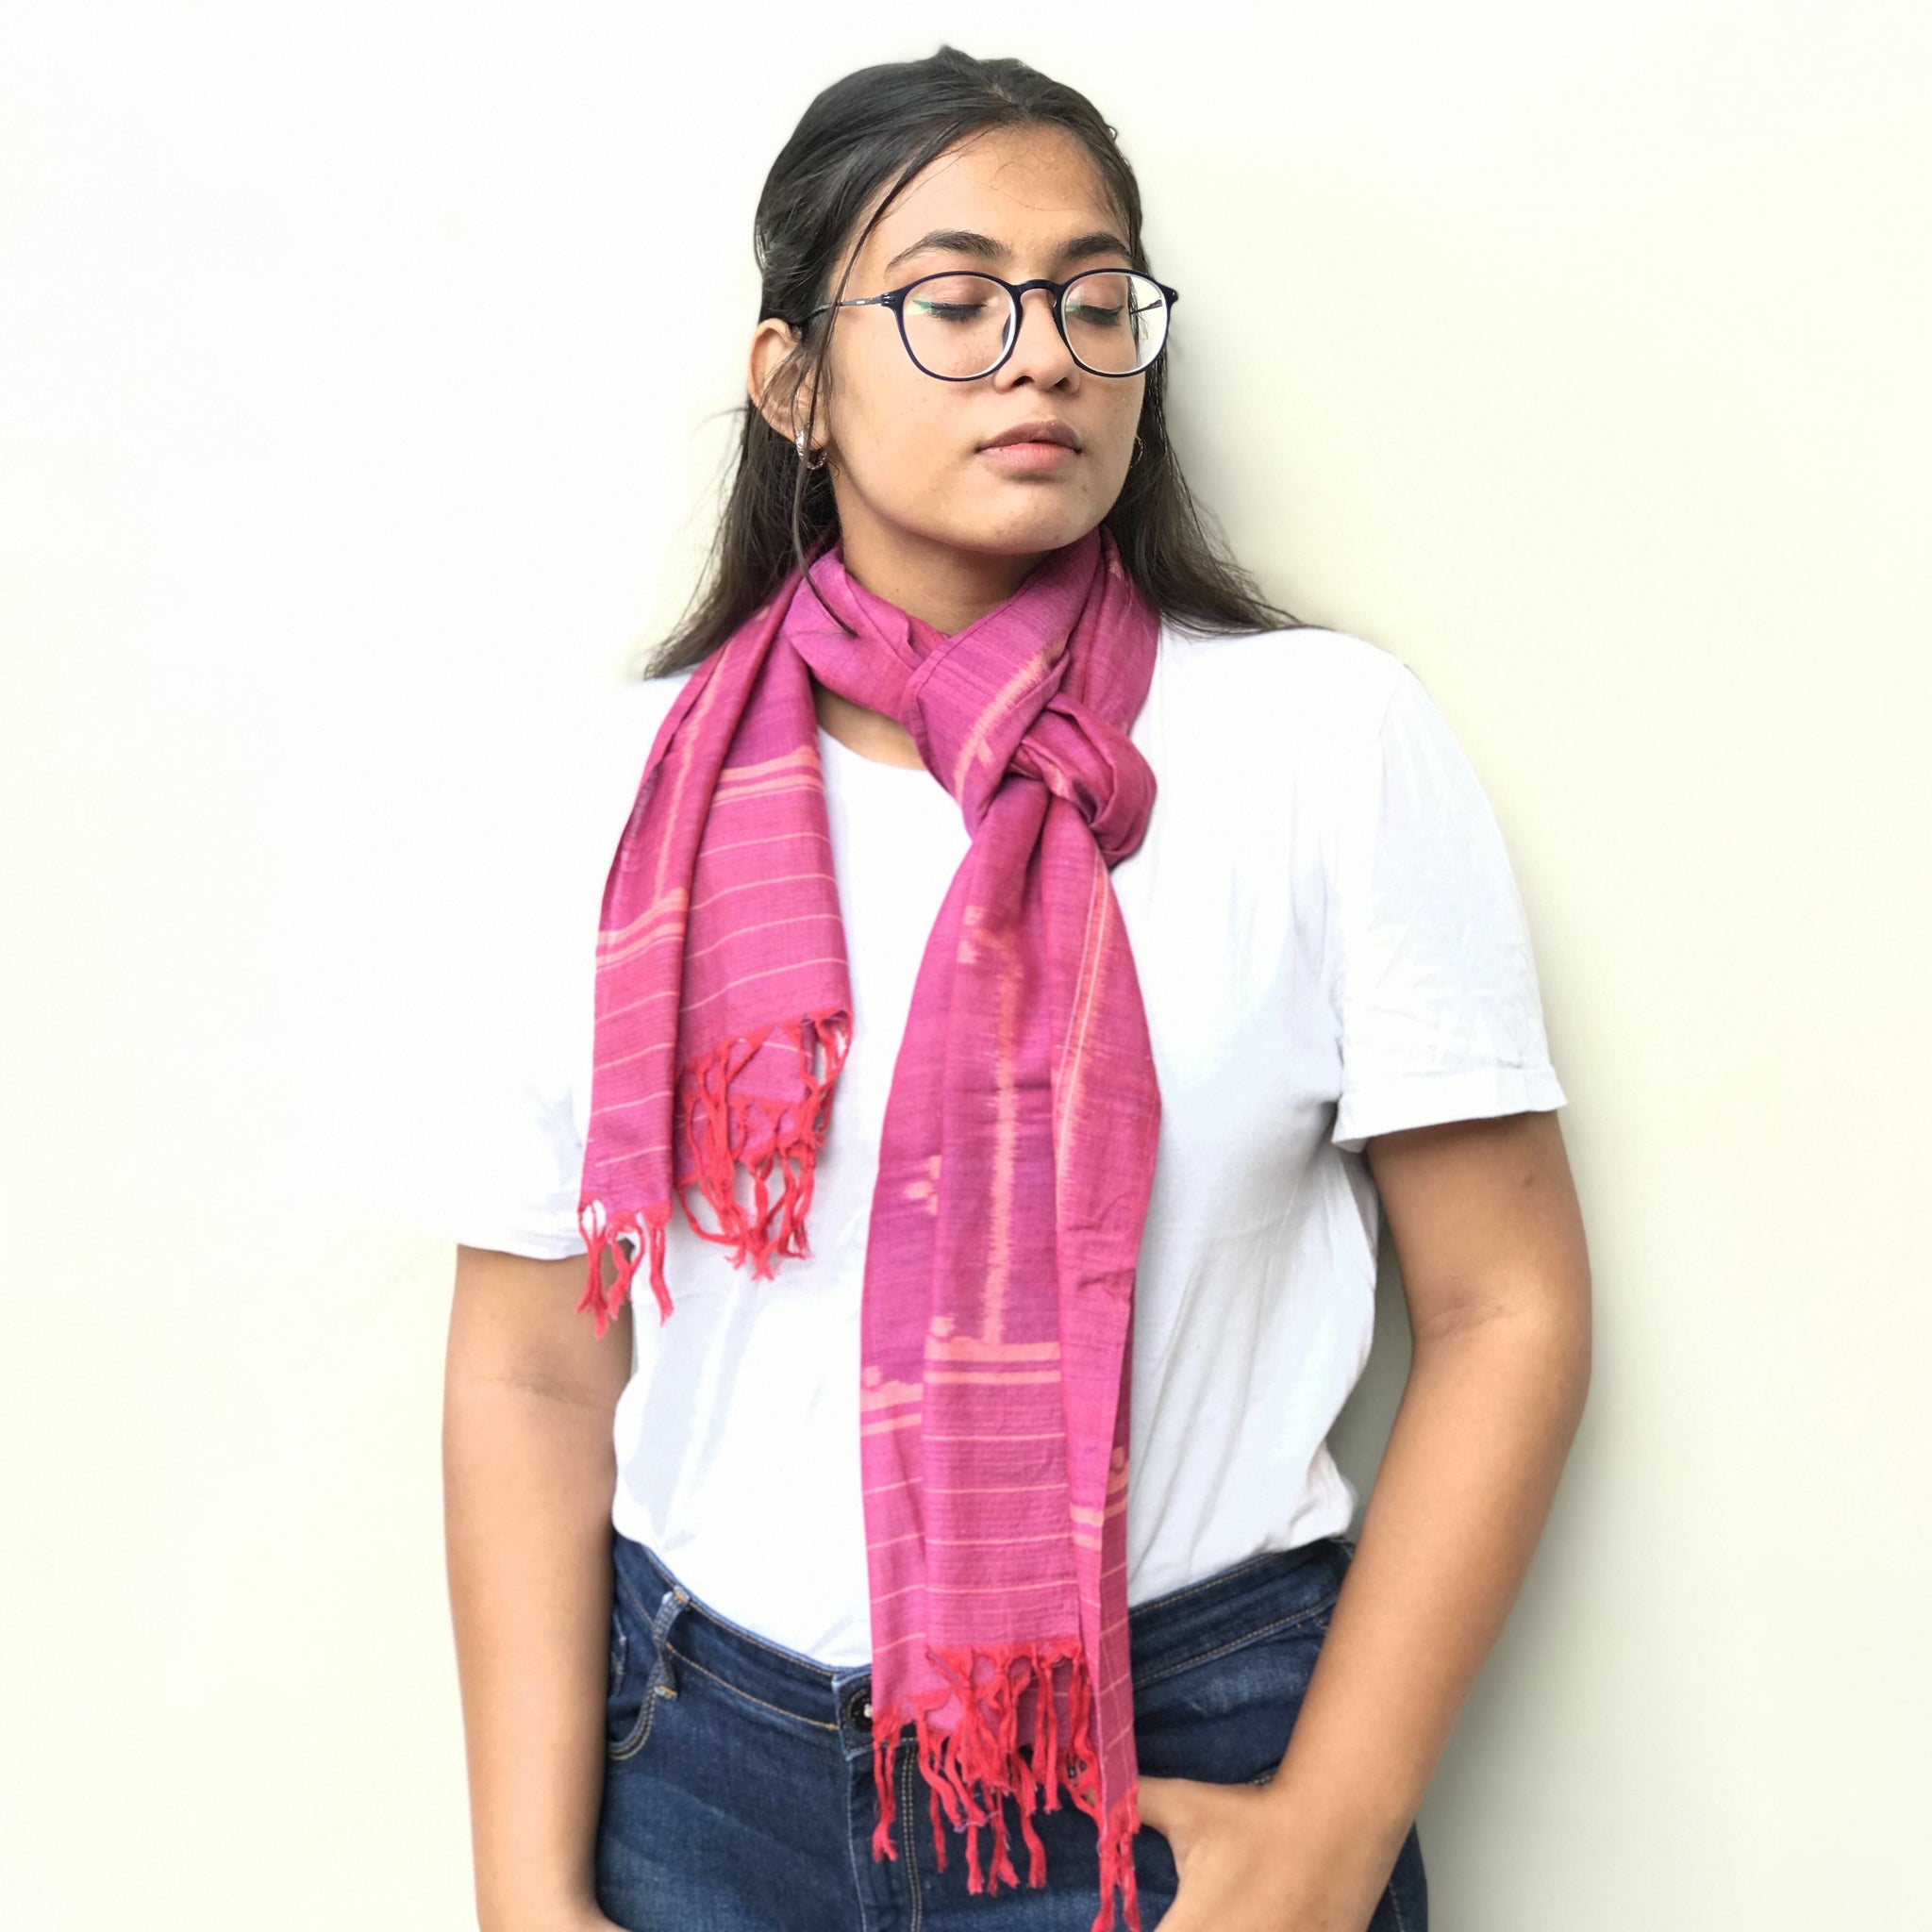 Handwoven two-tone red-purple Sambalpuri cotton ikat scarf with tiny floral butis allover